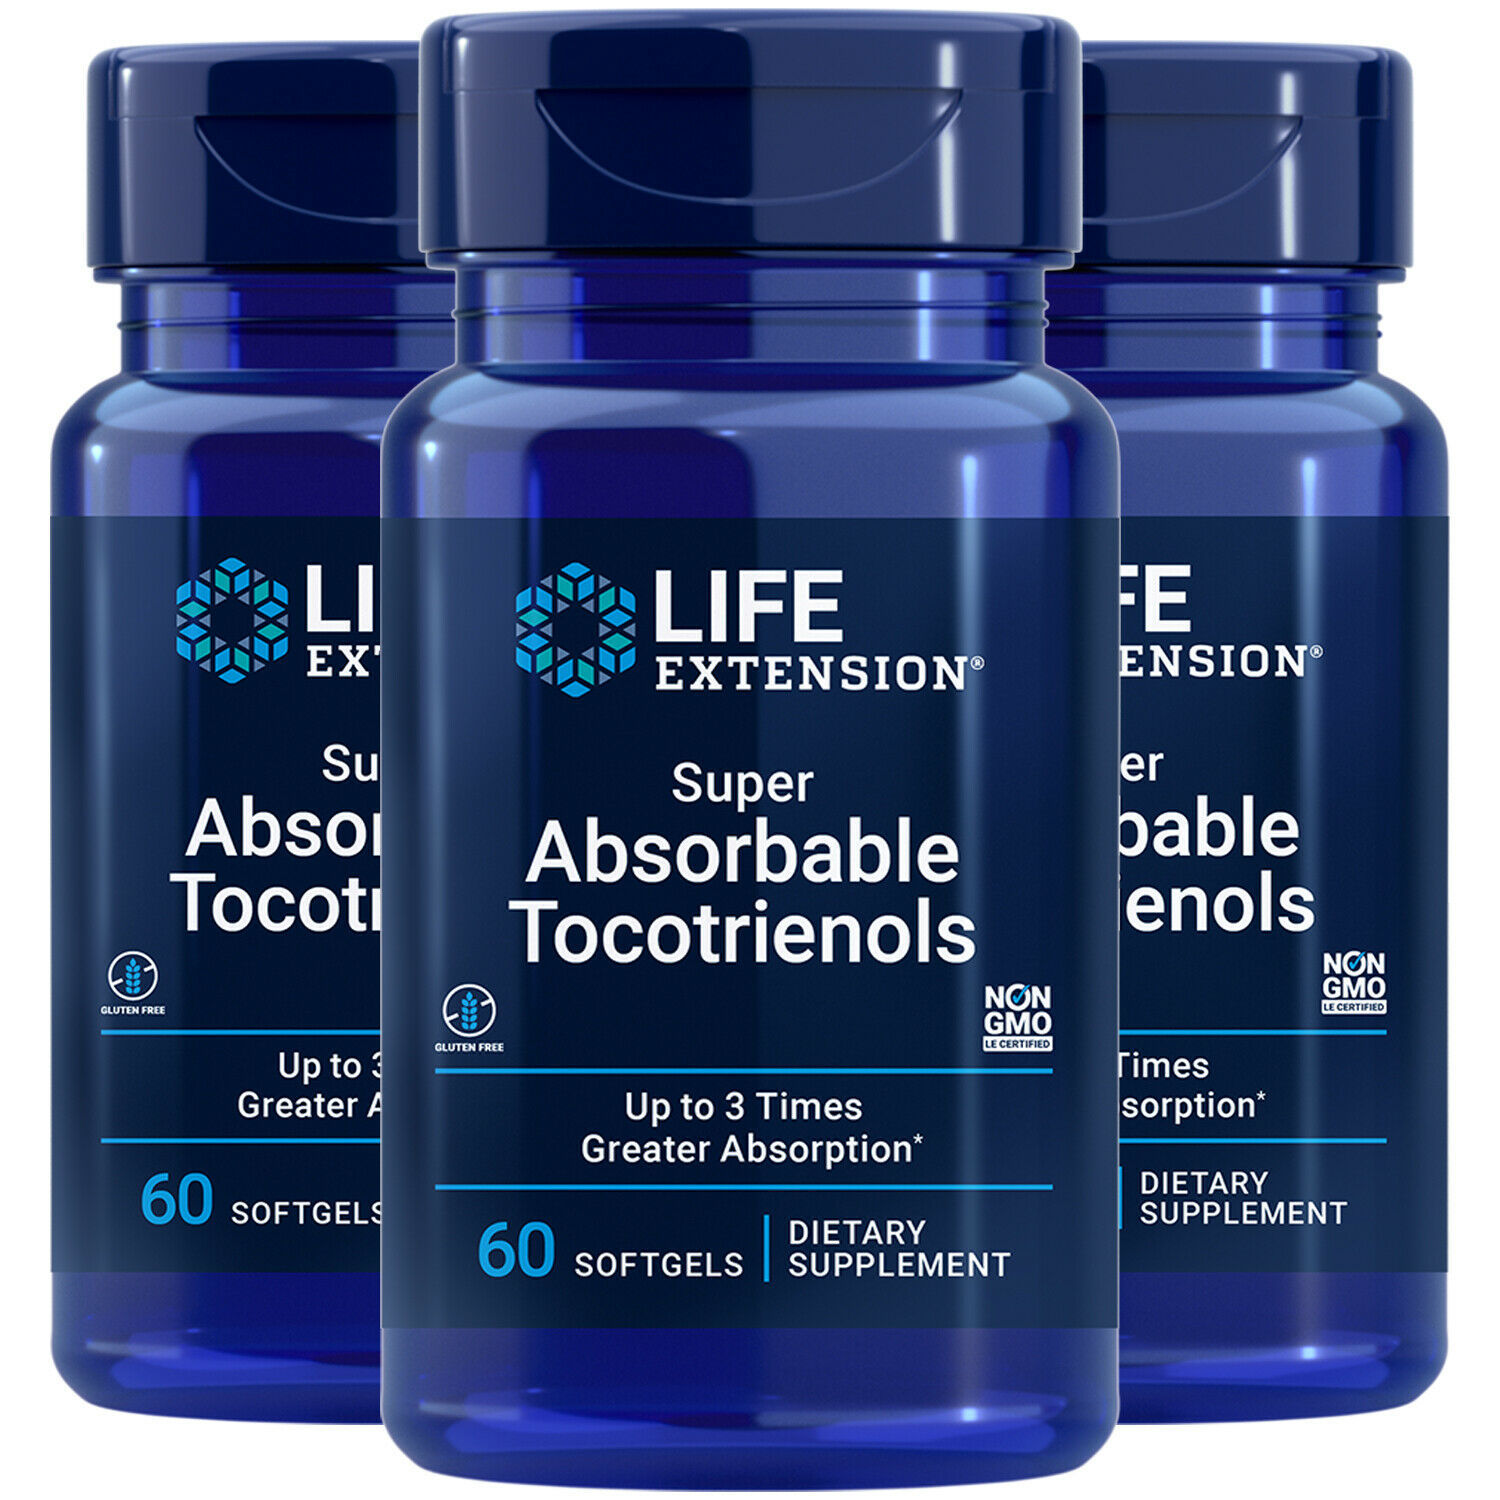 Super Absorbable Tocotrienols, 3X60gels Life Extension Most Absorbable Vitamin E